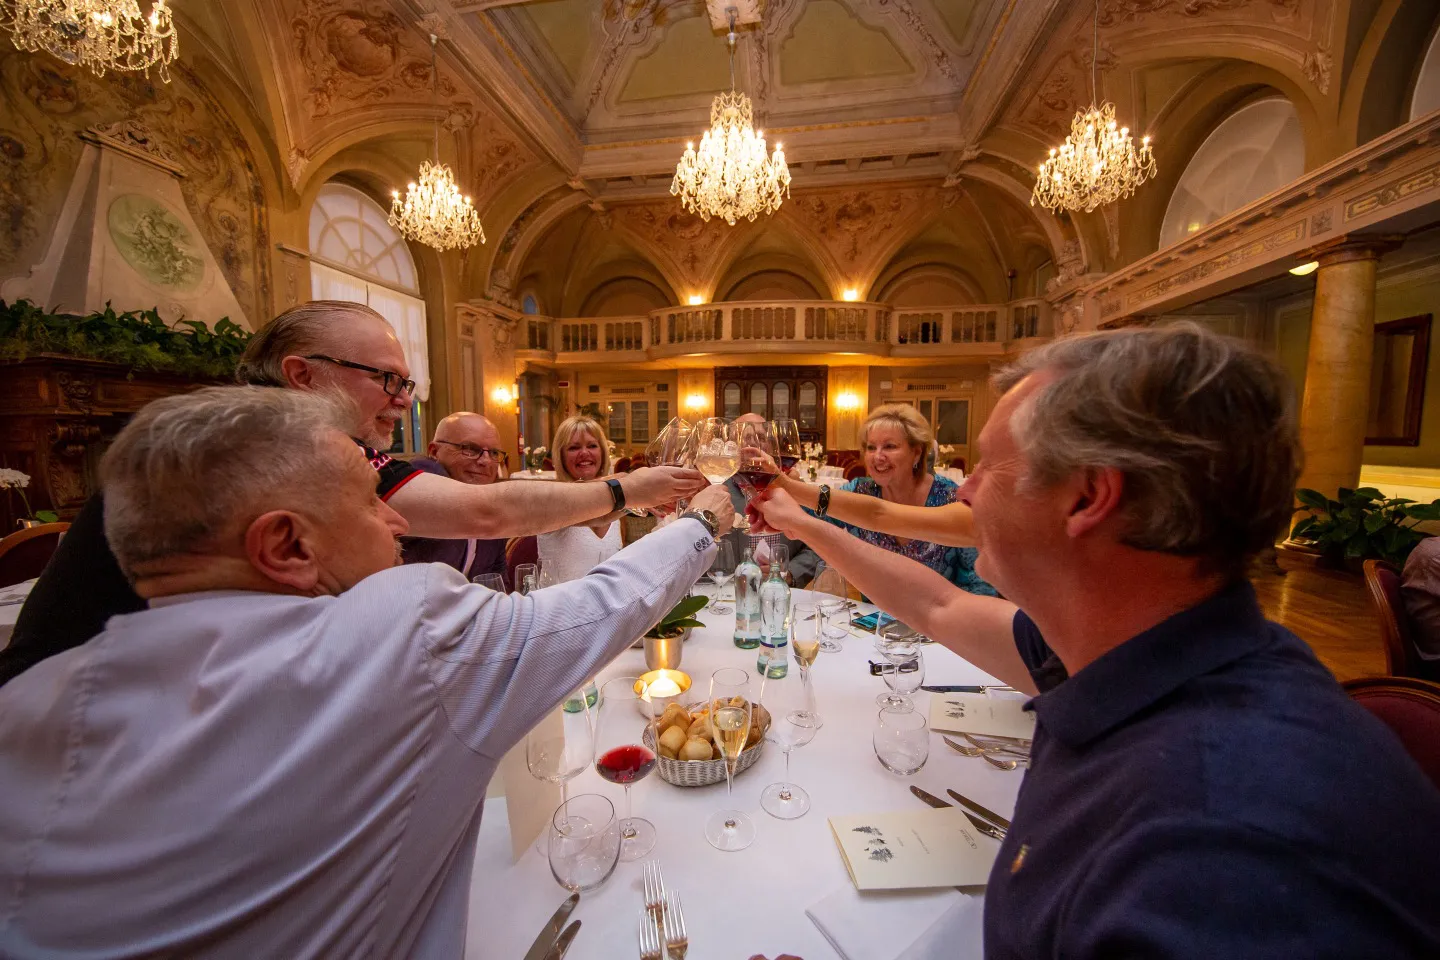 Enjoy fine dining and fine wine with new friends on a luxury tour of Italy